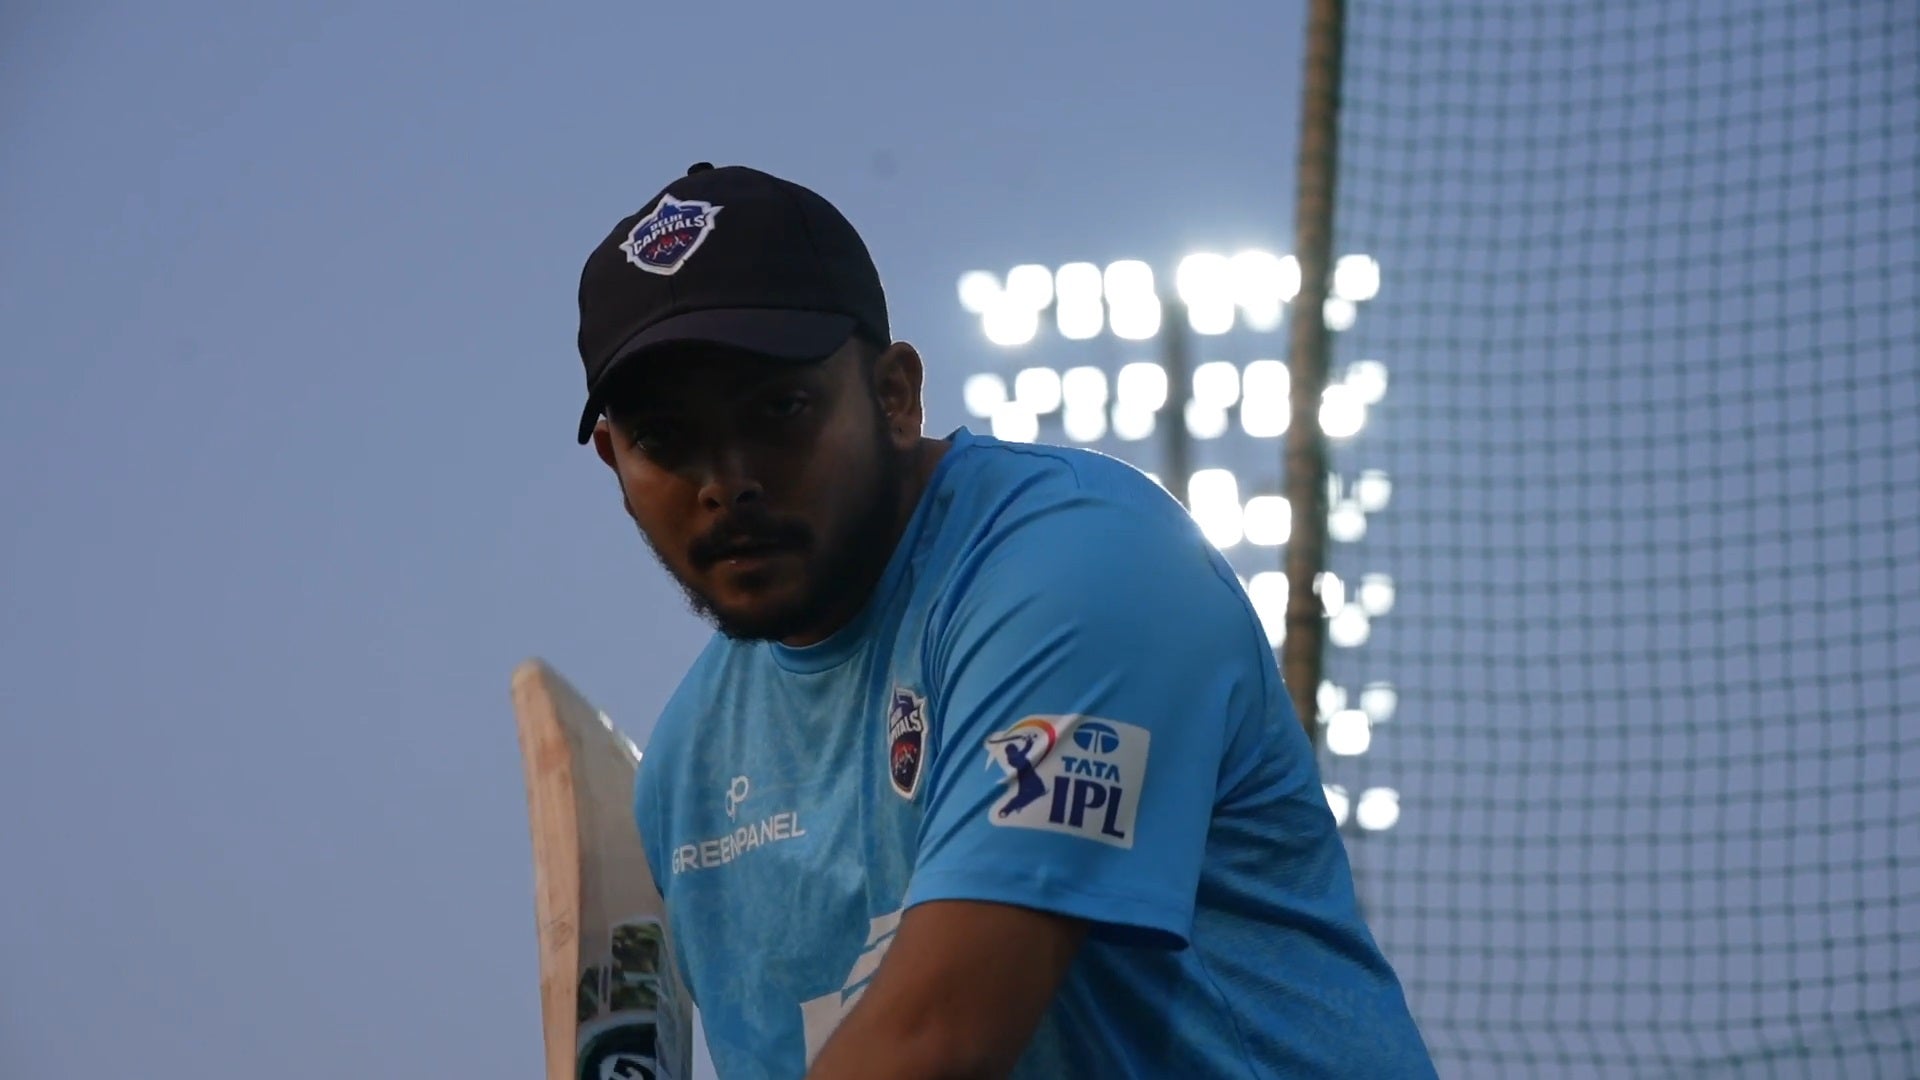 Prithvi Shaw oozes confidence in practice on JioTV